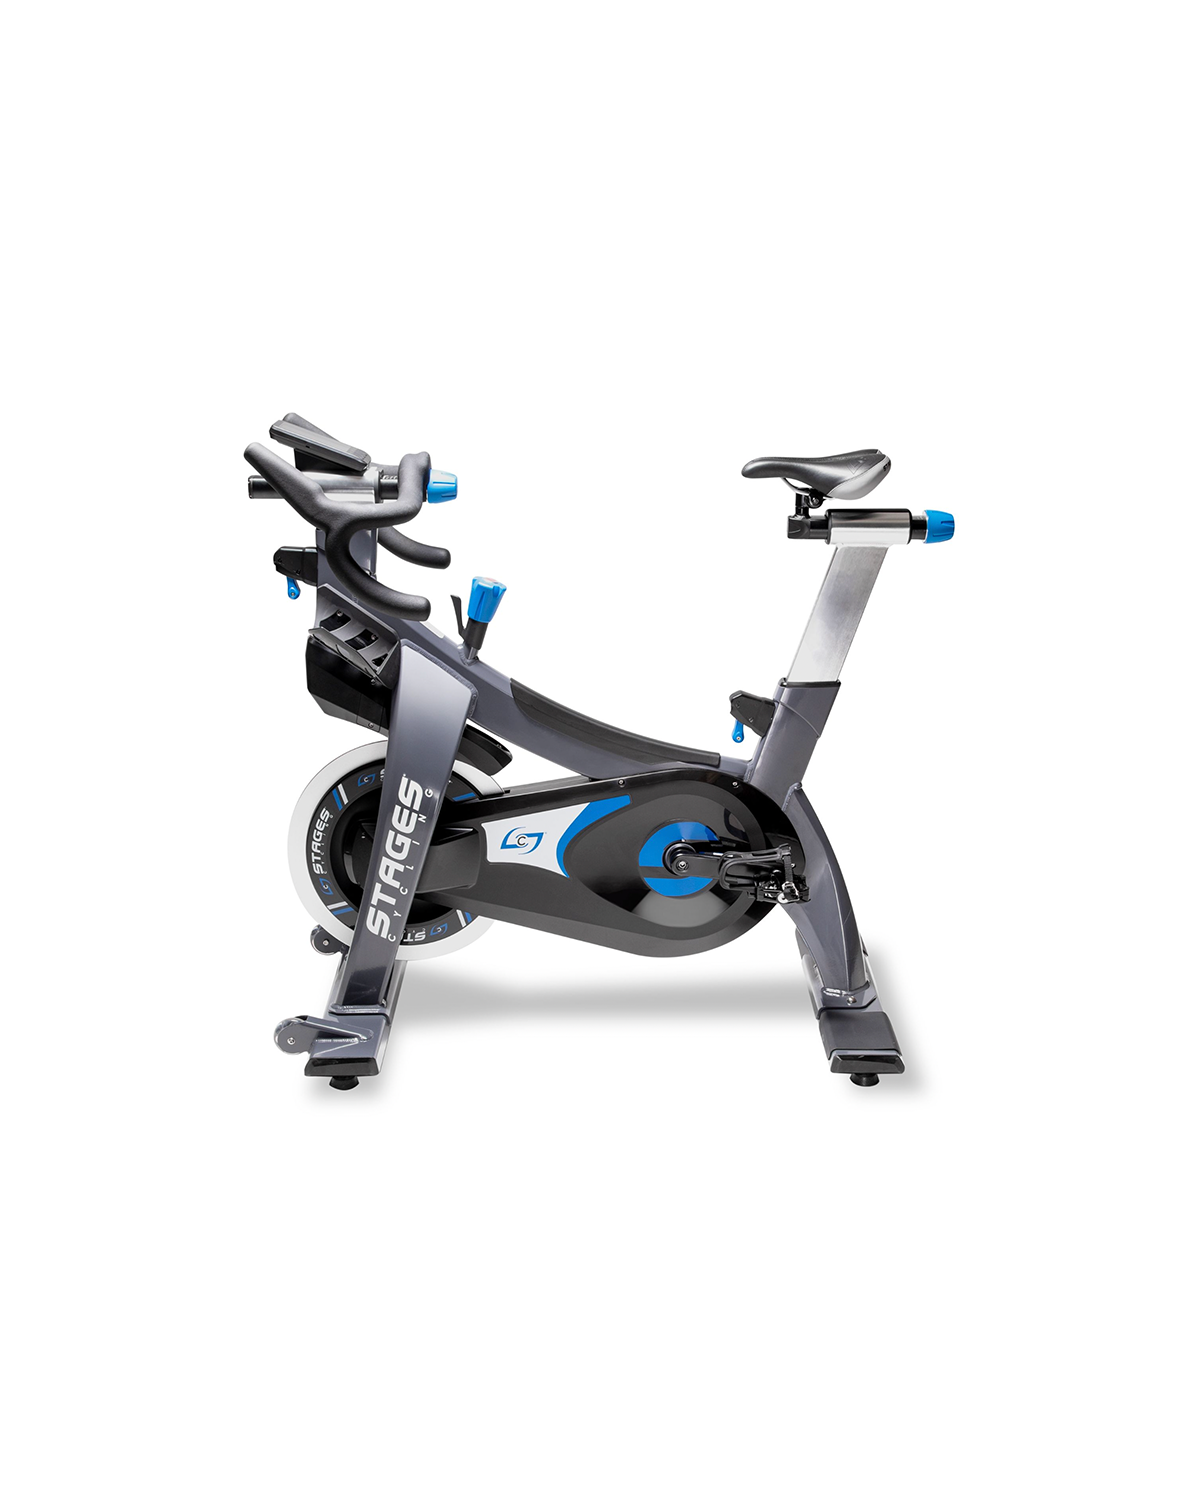 11 Indoor Exercise Bikes You'll Actually Want to Ride